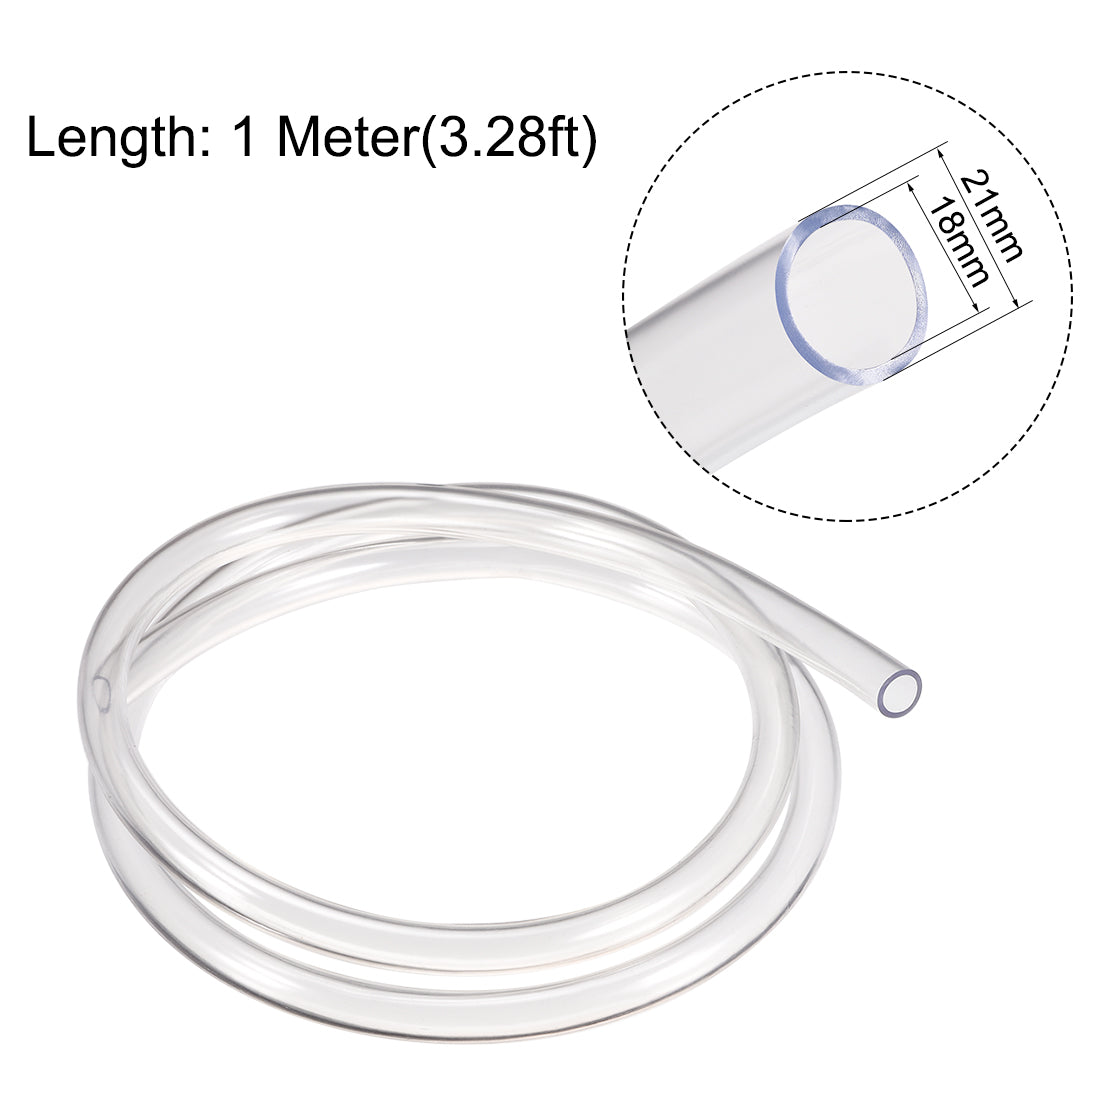 Uxcell Uxcell PVC Clear Vinly Tubing,18mm ID x 21mm OD,1 Meter/ 3.28ft,Plastic Flexible Hose Tube,Flex Pipe for Water,Beverage Pump